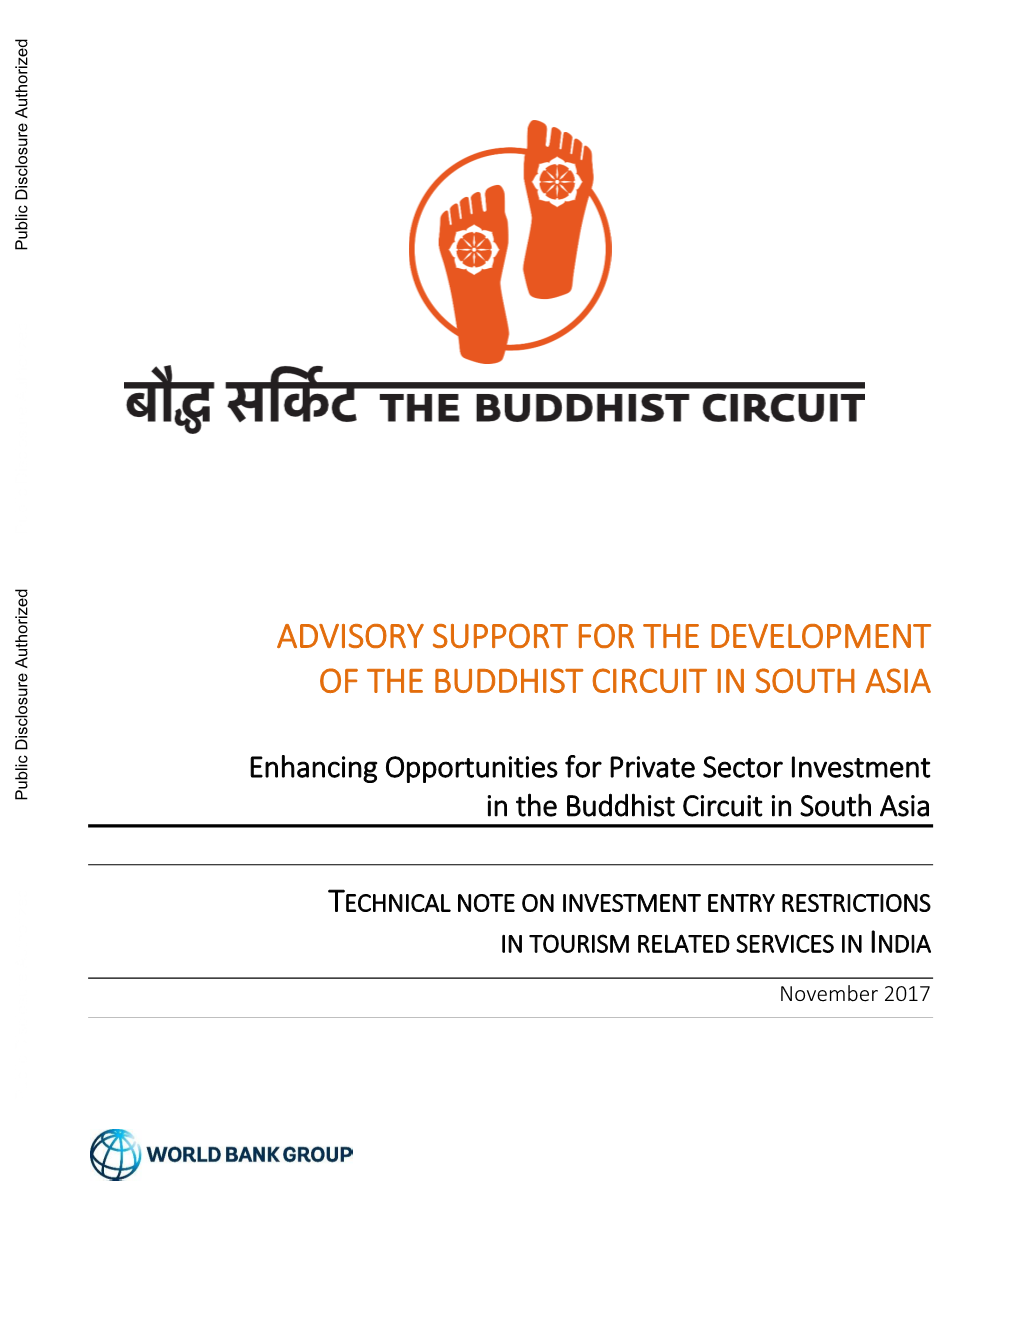 Advisory Support for the Development of the Buddhist Circuit in South Asia